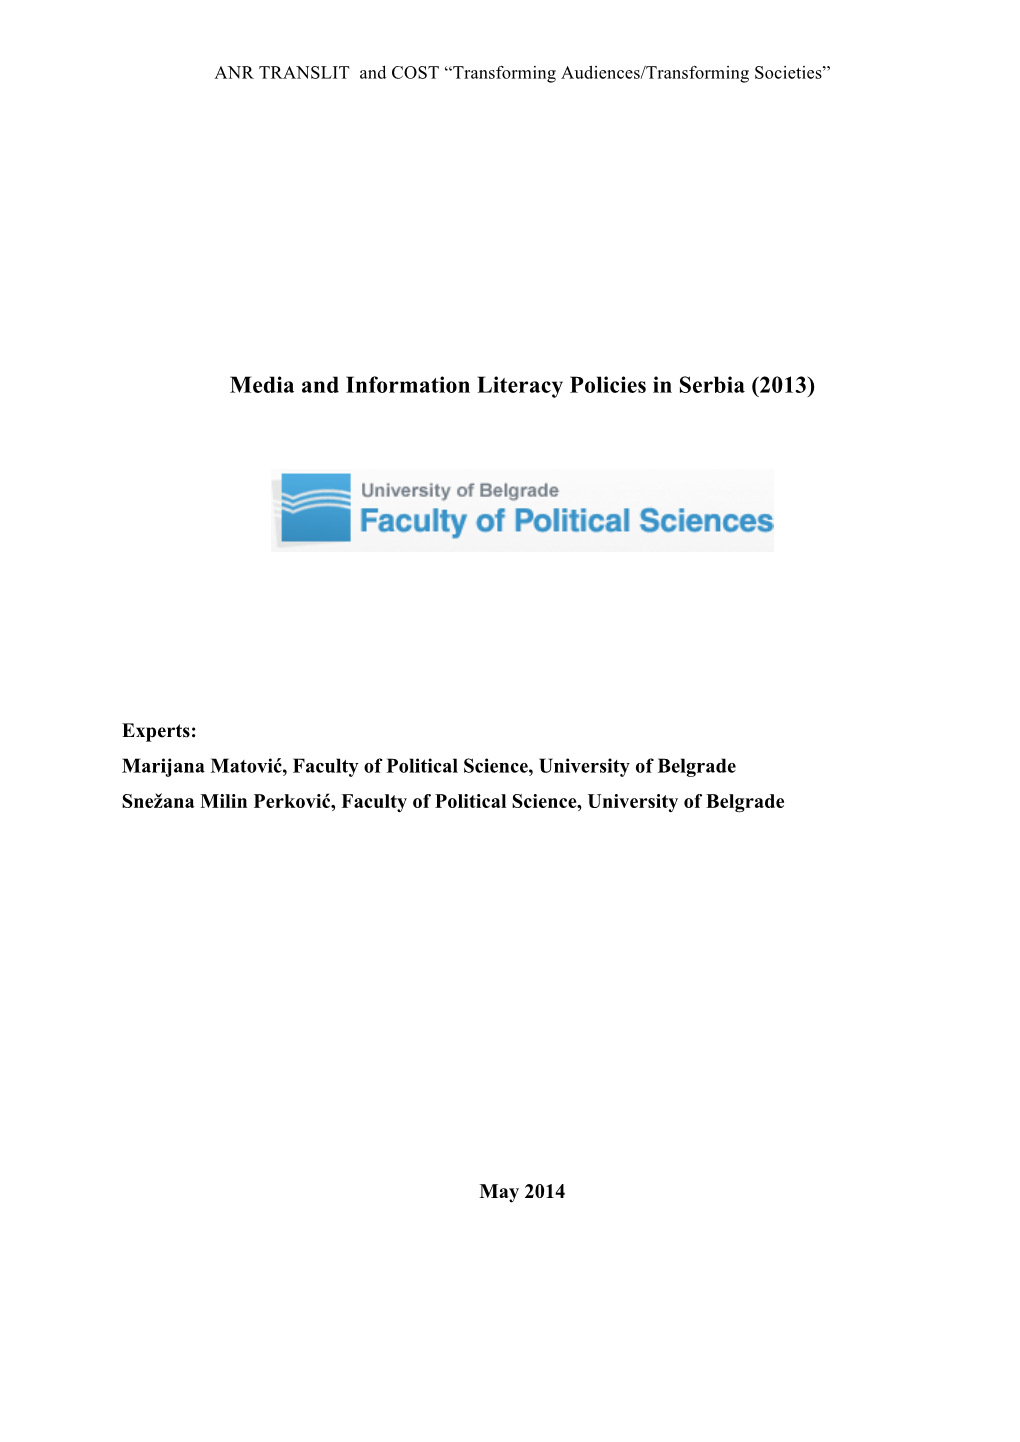 Media and Information Literacy Policies in Serbia (2013)